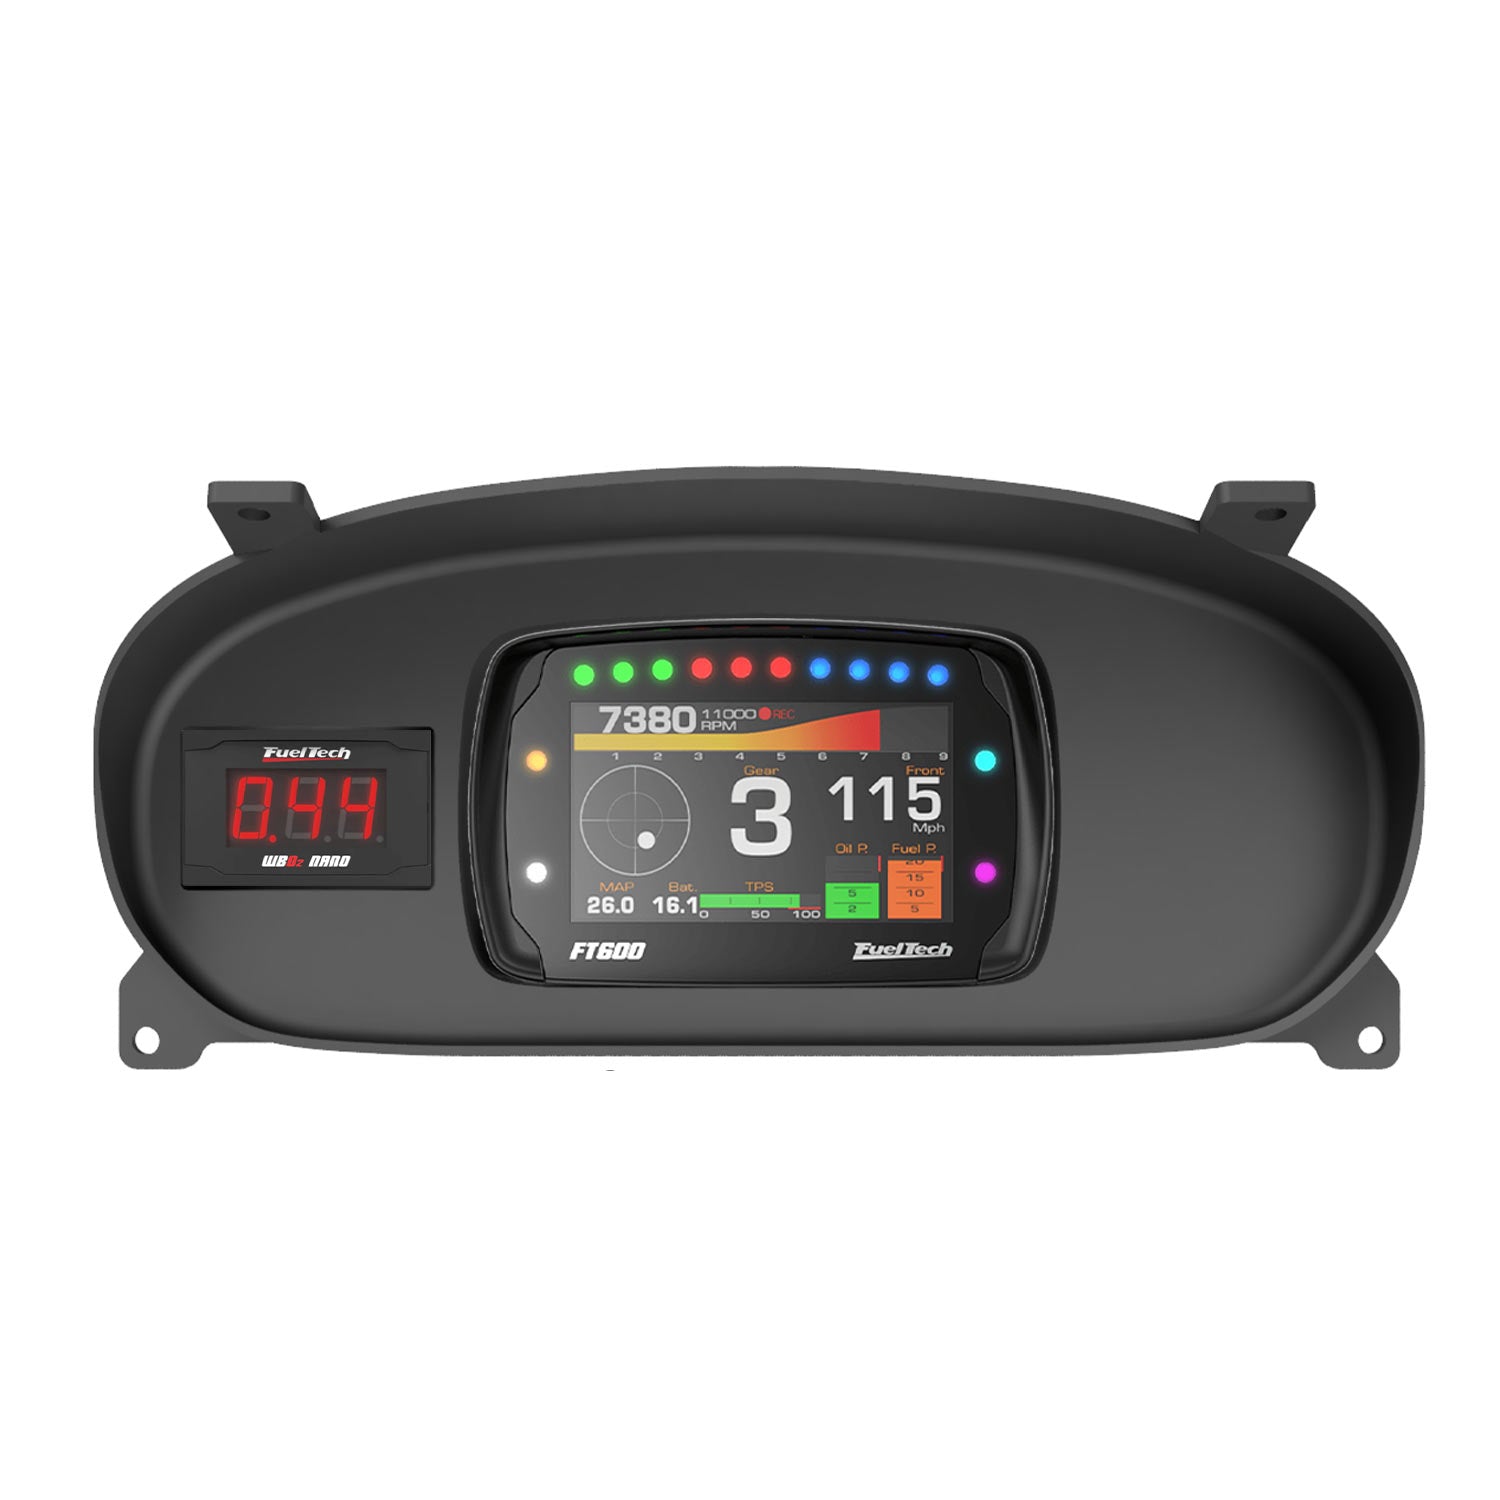 Honda Civic 96-00 EK Recessed Dash Mount for the Fueltech FT600 and Wideband Nano O2 (display not included)